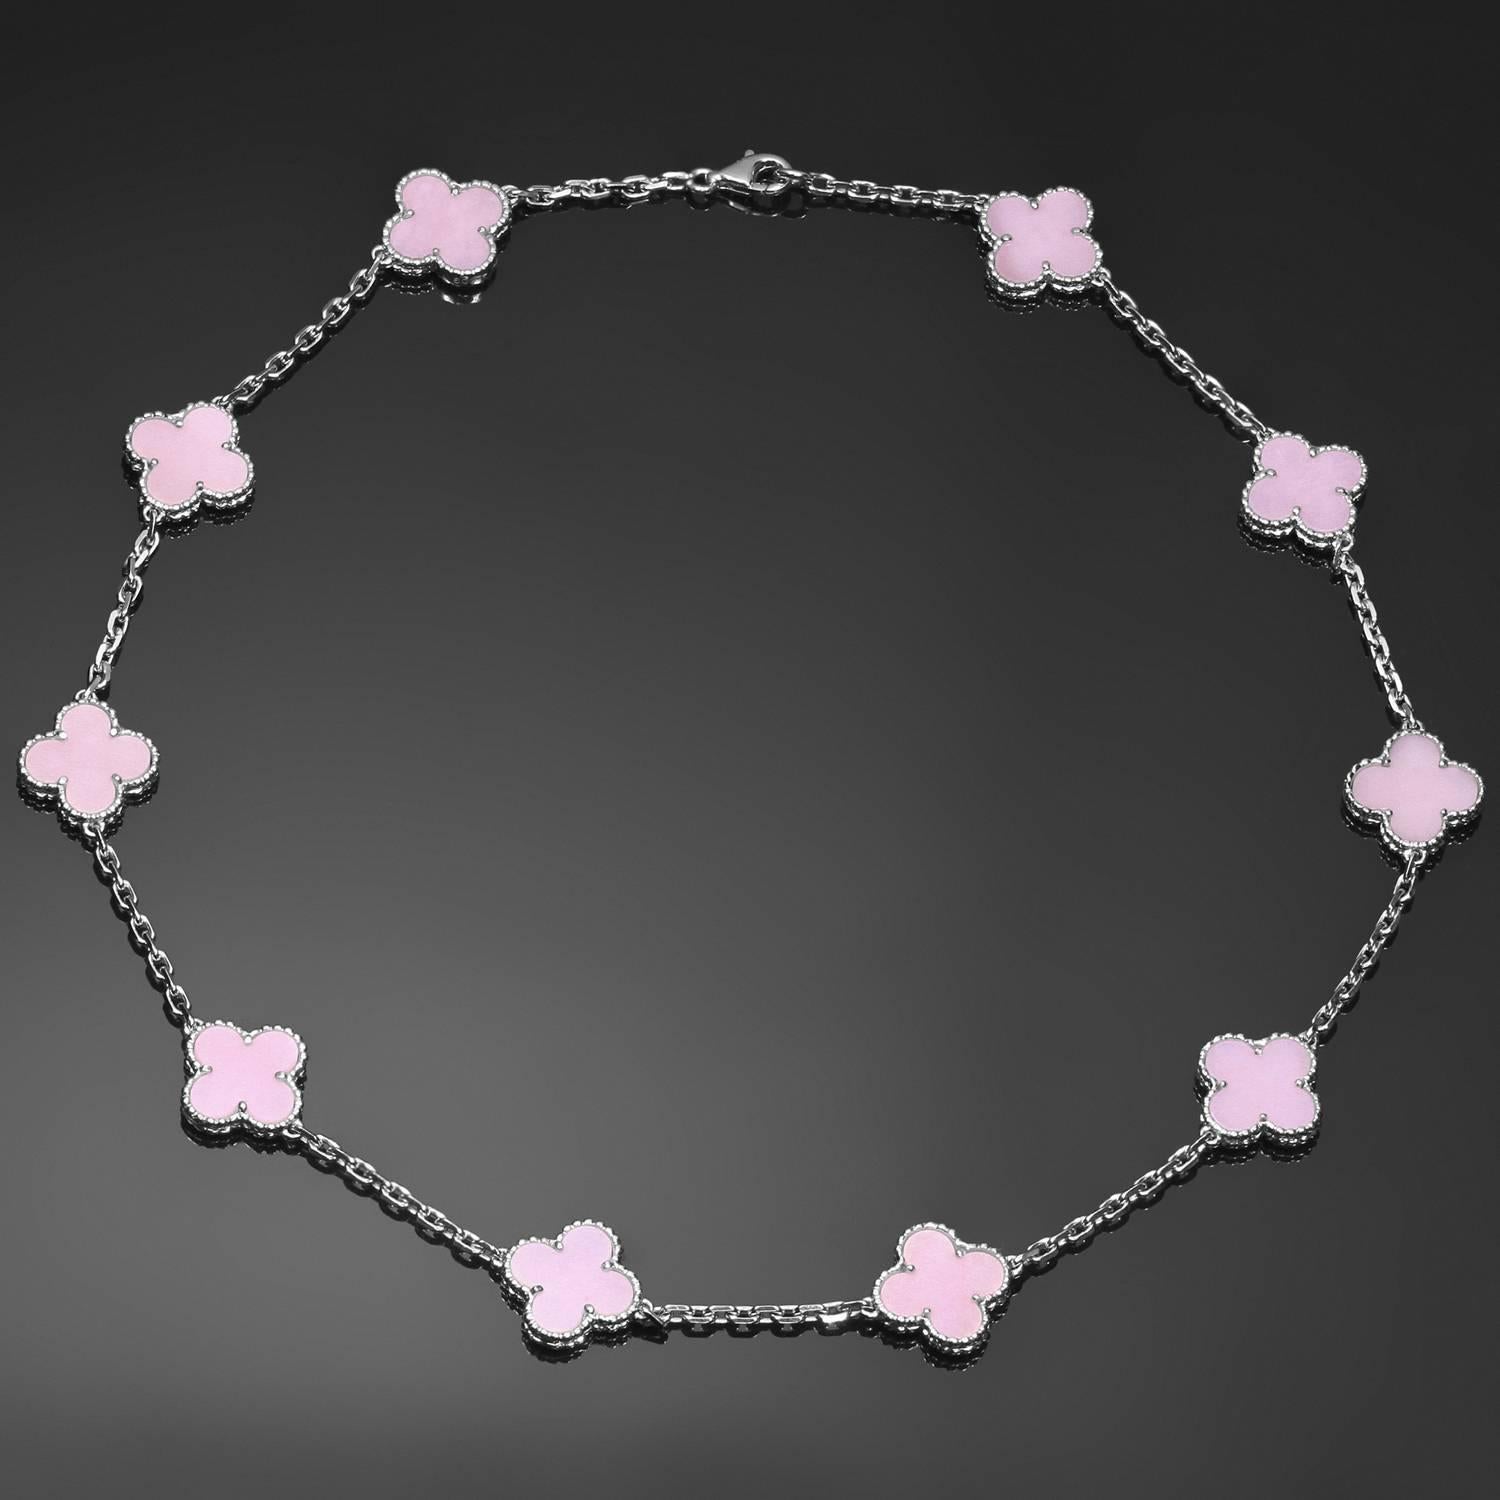 This splendid Van Cleef & Arpels necklace from the iconic Alhambra collection is crafted in 18k white gold and features 10 lucky clover motifs beautifully inlaid with natural pink opal in round bead settings. This extremely rare necklace has